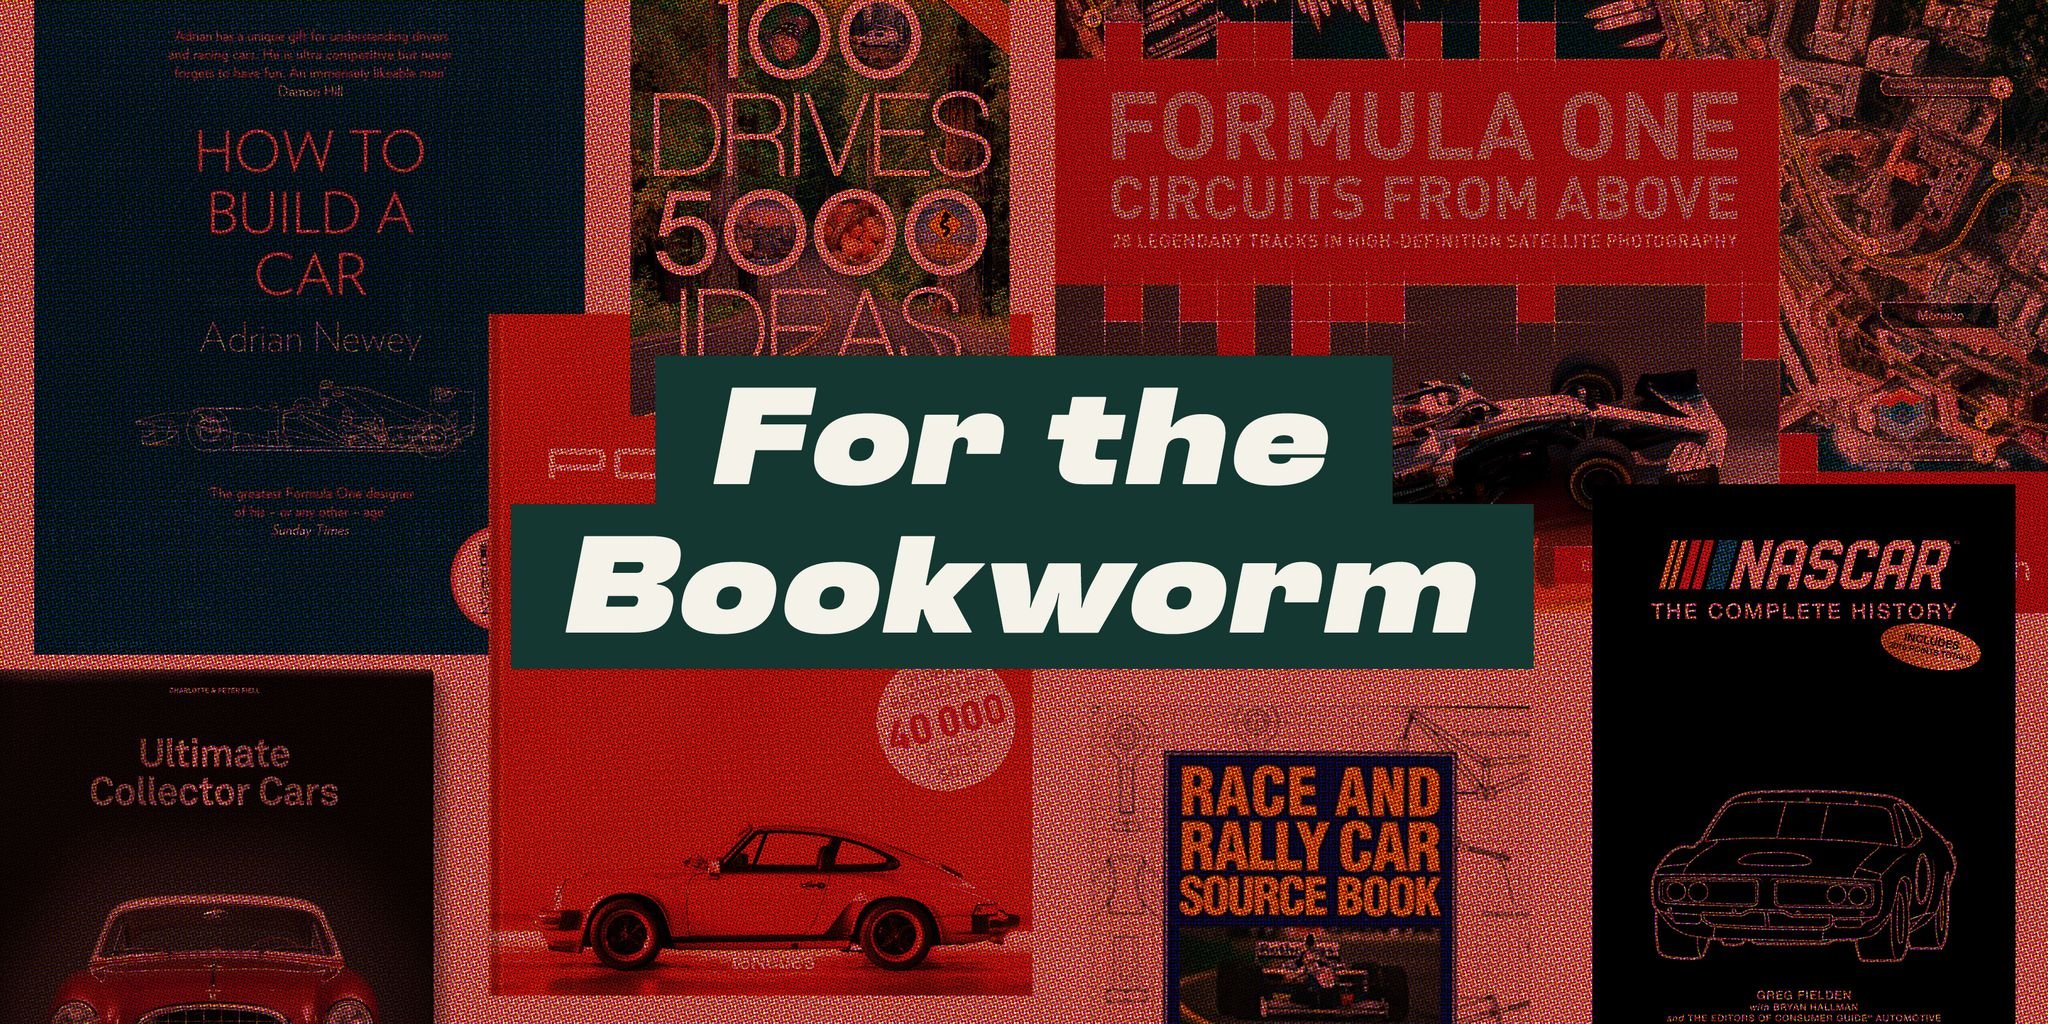 Car-Themed Books That Make Perfect Gifts